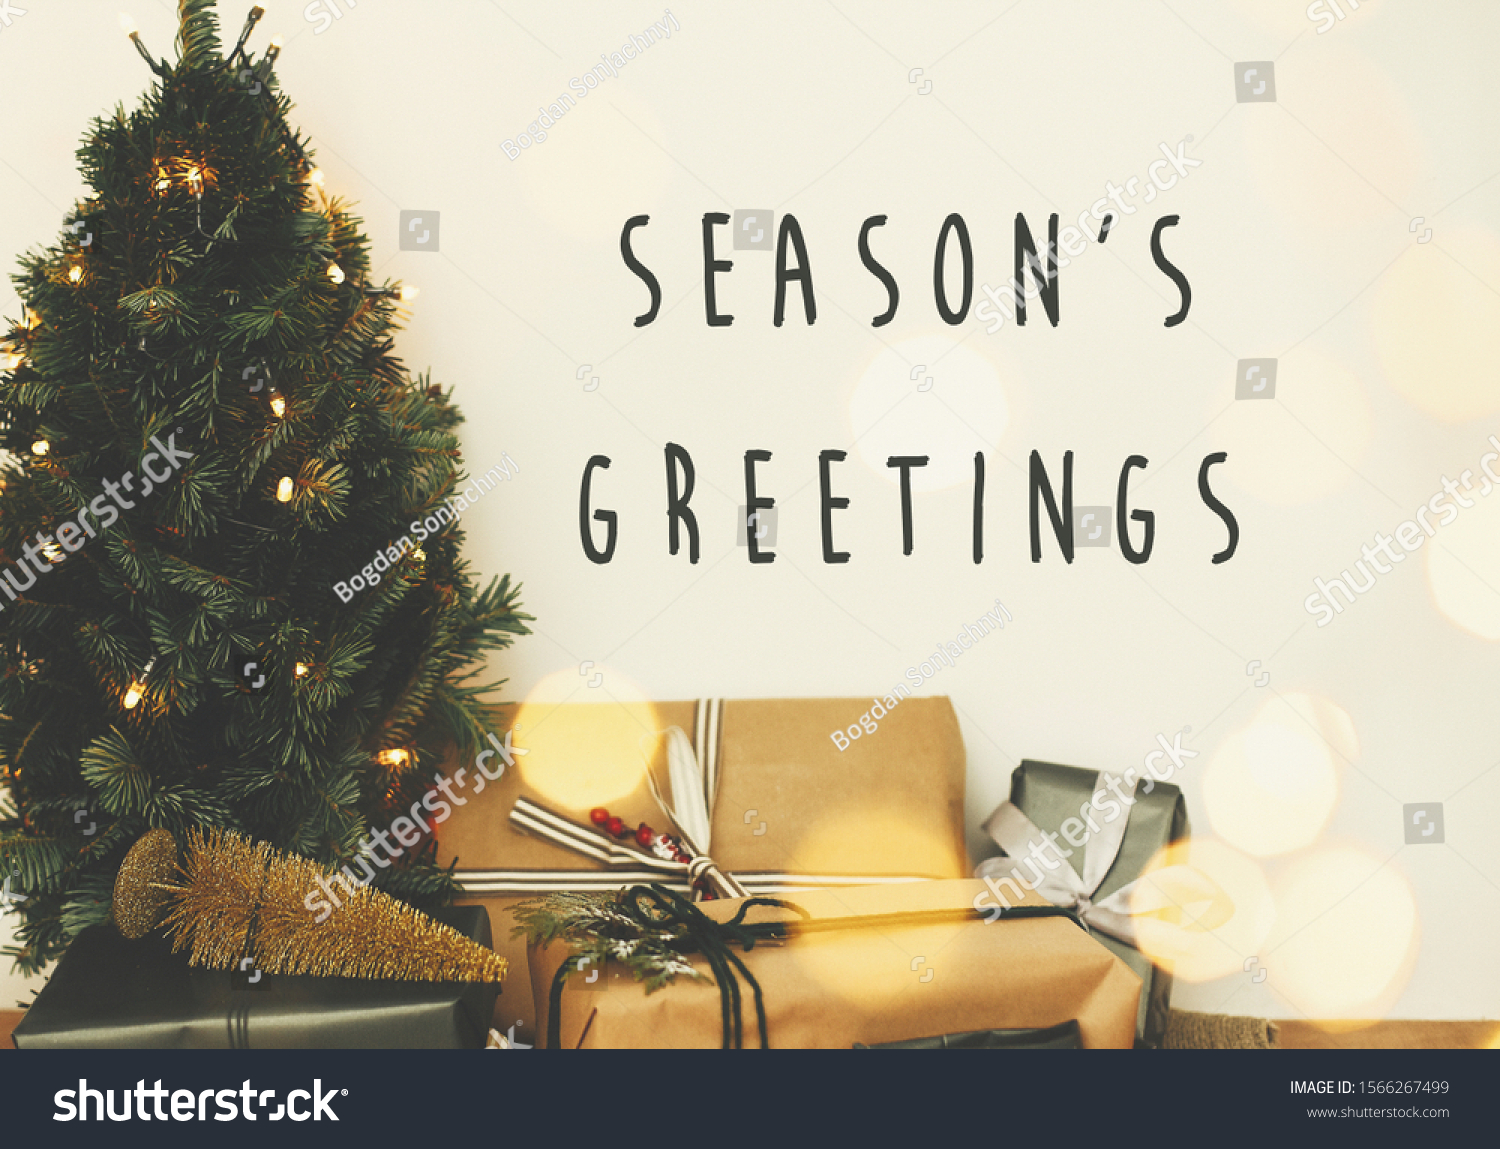 Season's greetings text sign on christmas tree in golden lights bokeh with festive stylish gifts in white room. Seasons greeting card #1566267499